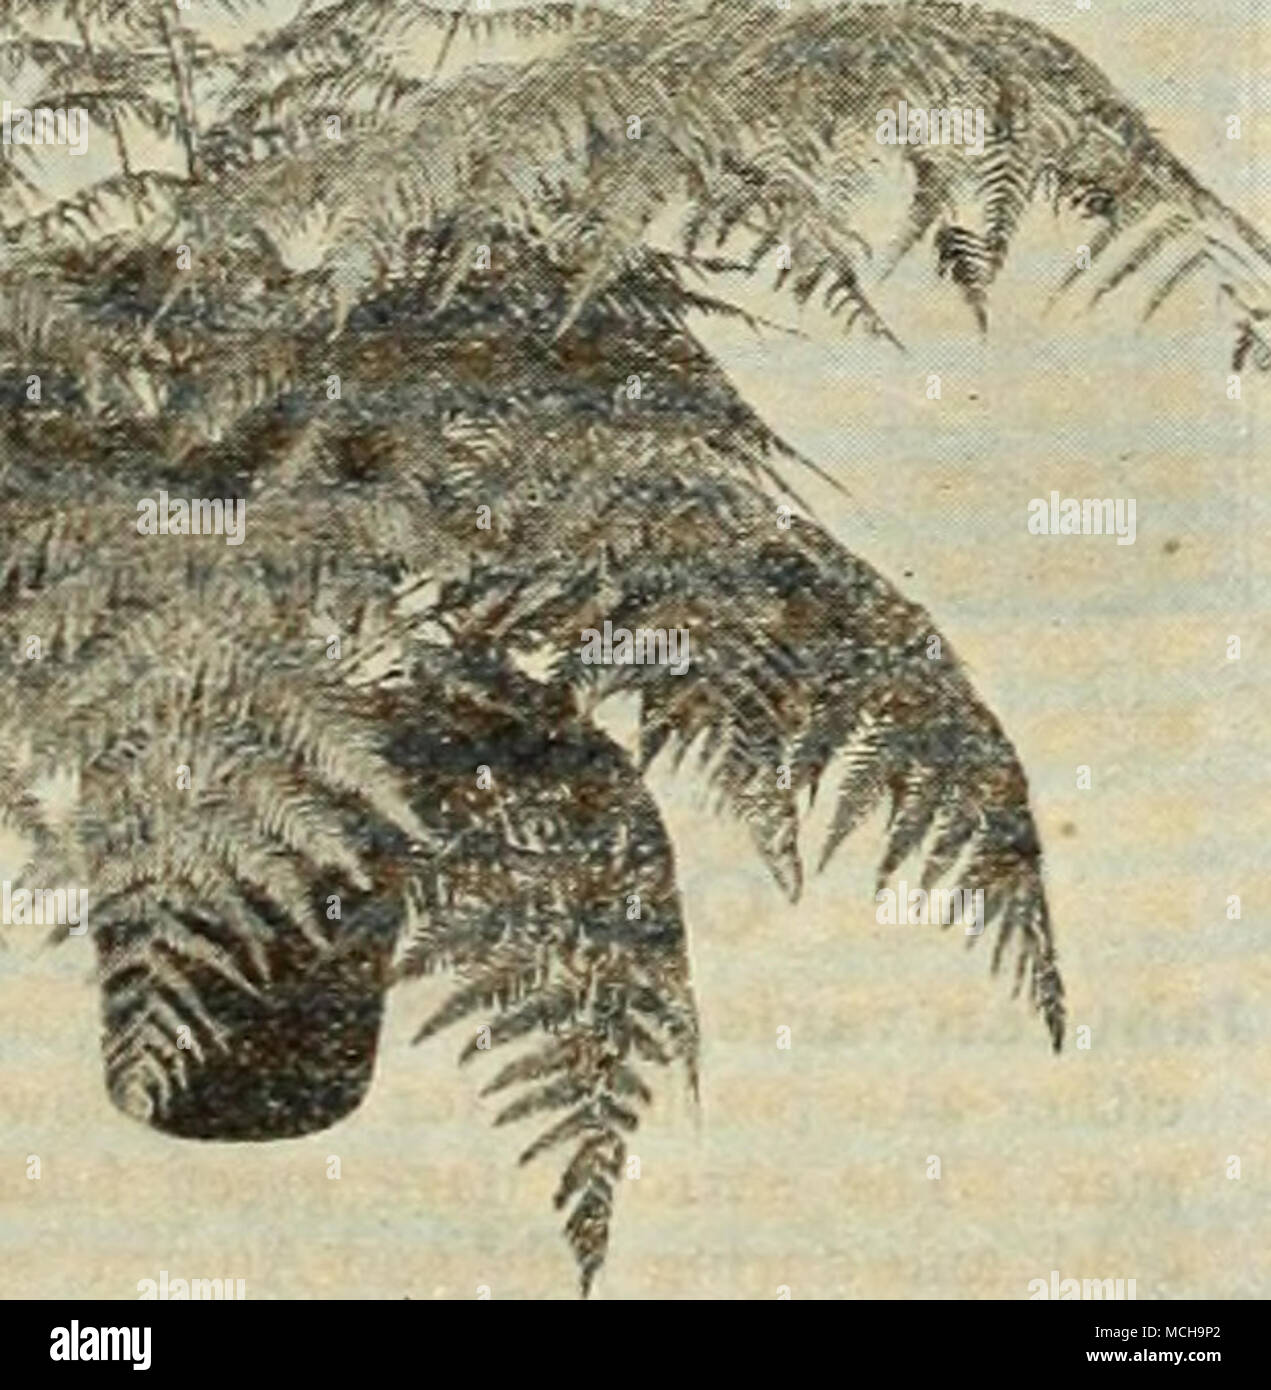 . Cibotium Schiedei Cibotium Schiedei {Mexican Tree Fern). One of the most desirable and most valuable of all Ferns for room decoration. Beautiful hght green foliage. 4-inch pots $1.00; 6-inch pots $2.50; 8-inch tubs $5.00; 10-inch tubs $7.50 each. Cyrtomium Rochfordianum compactum {Crested Holly Fern). Ne.xt to the Boston Ferns the Holly Fern is the most satisfactory for home and apartment use because of its resistance to unfavorable conditions. Has rich glossy dark green foliage. 2j-inch pots 20c; 3-inch pots 25c; 4-inch pots 50c each. Nephrolepis bostoniensis (Boston Fern). The original typ Stock Photo